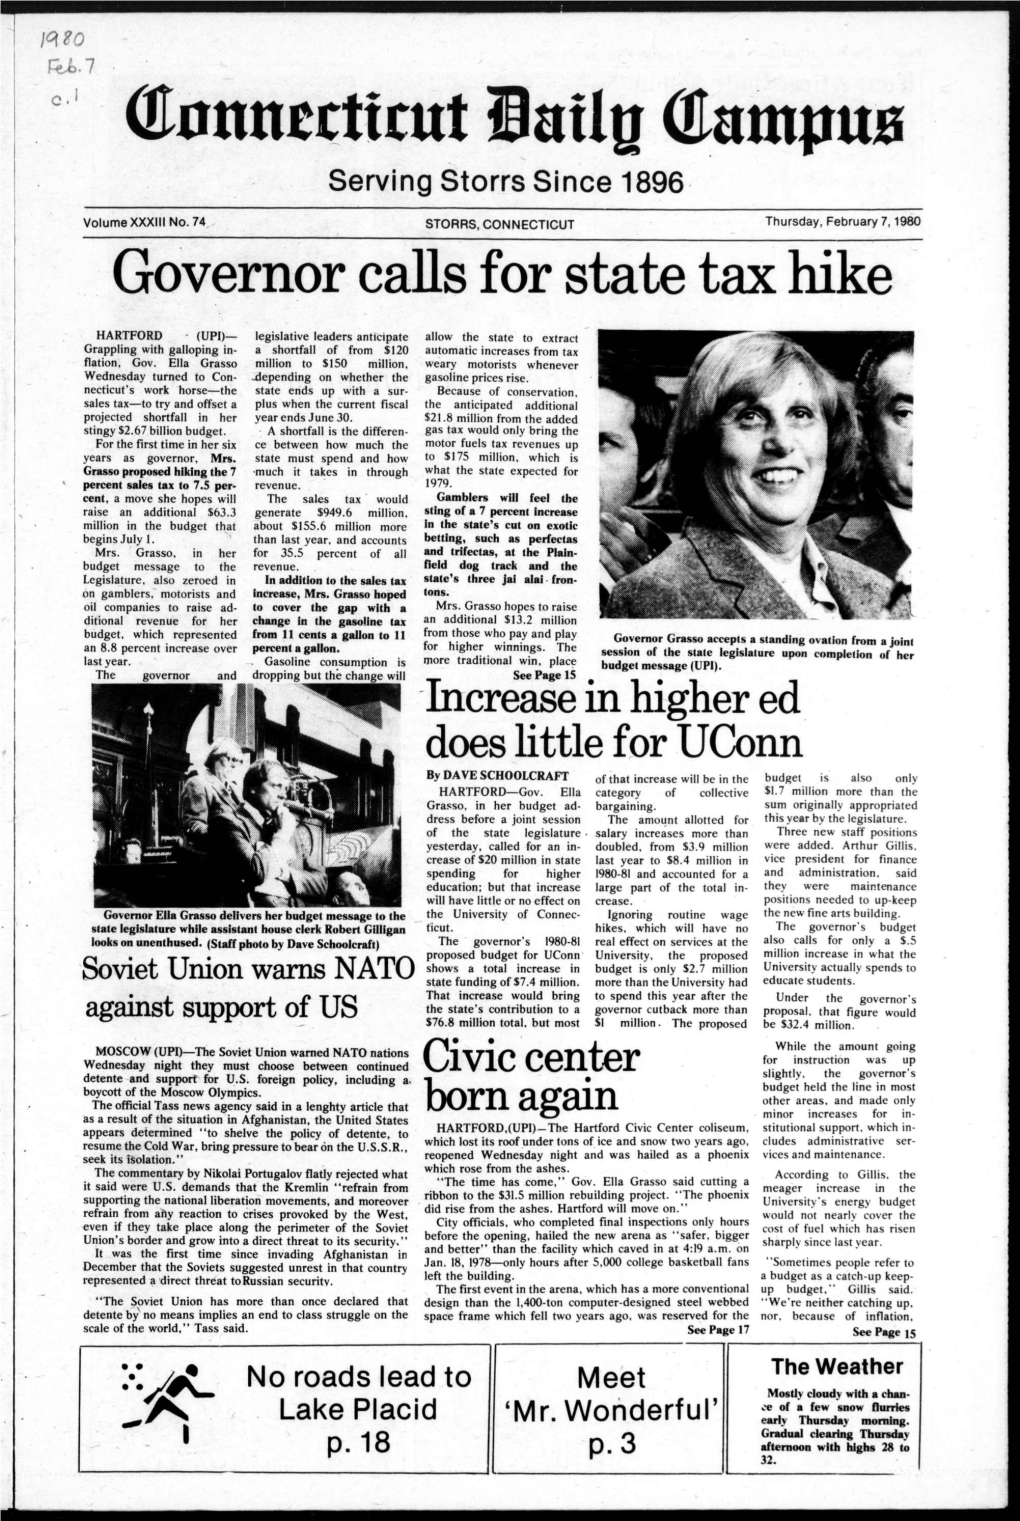 Governor Calls for State Tax Hike